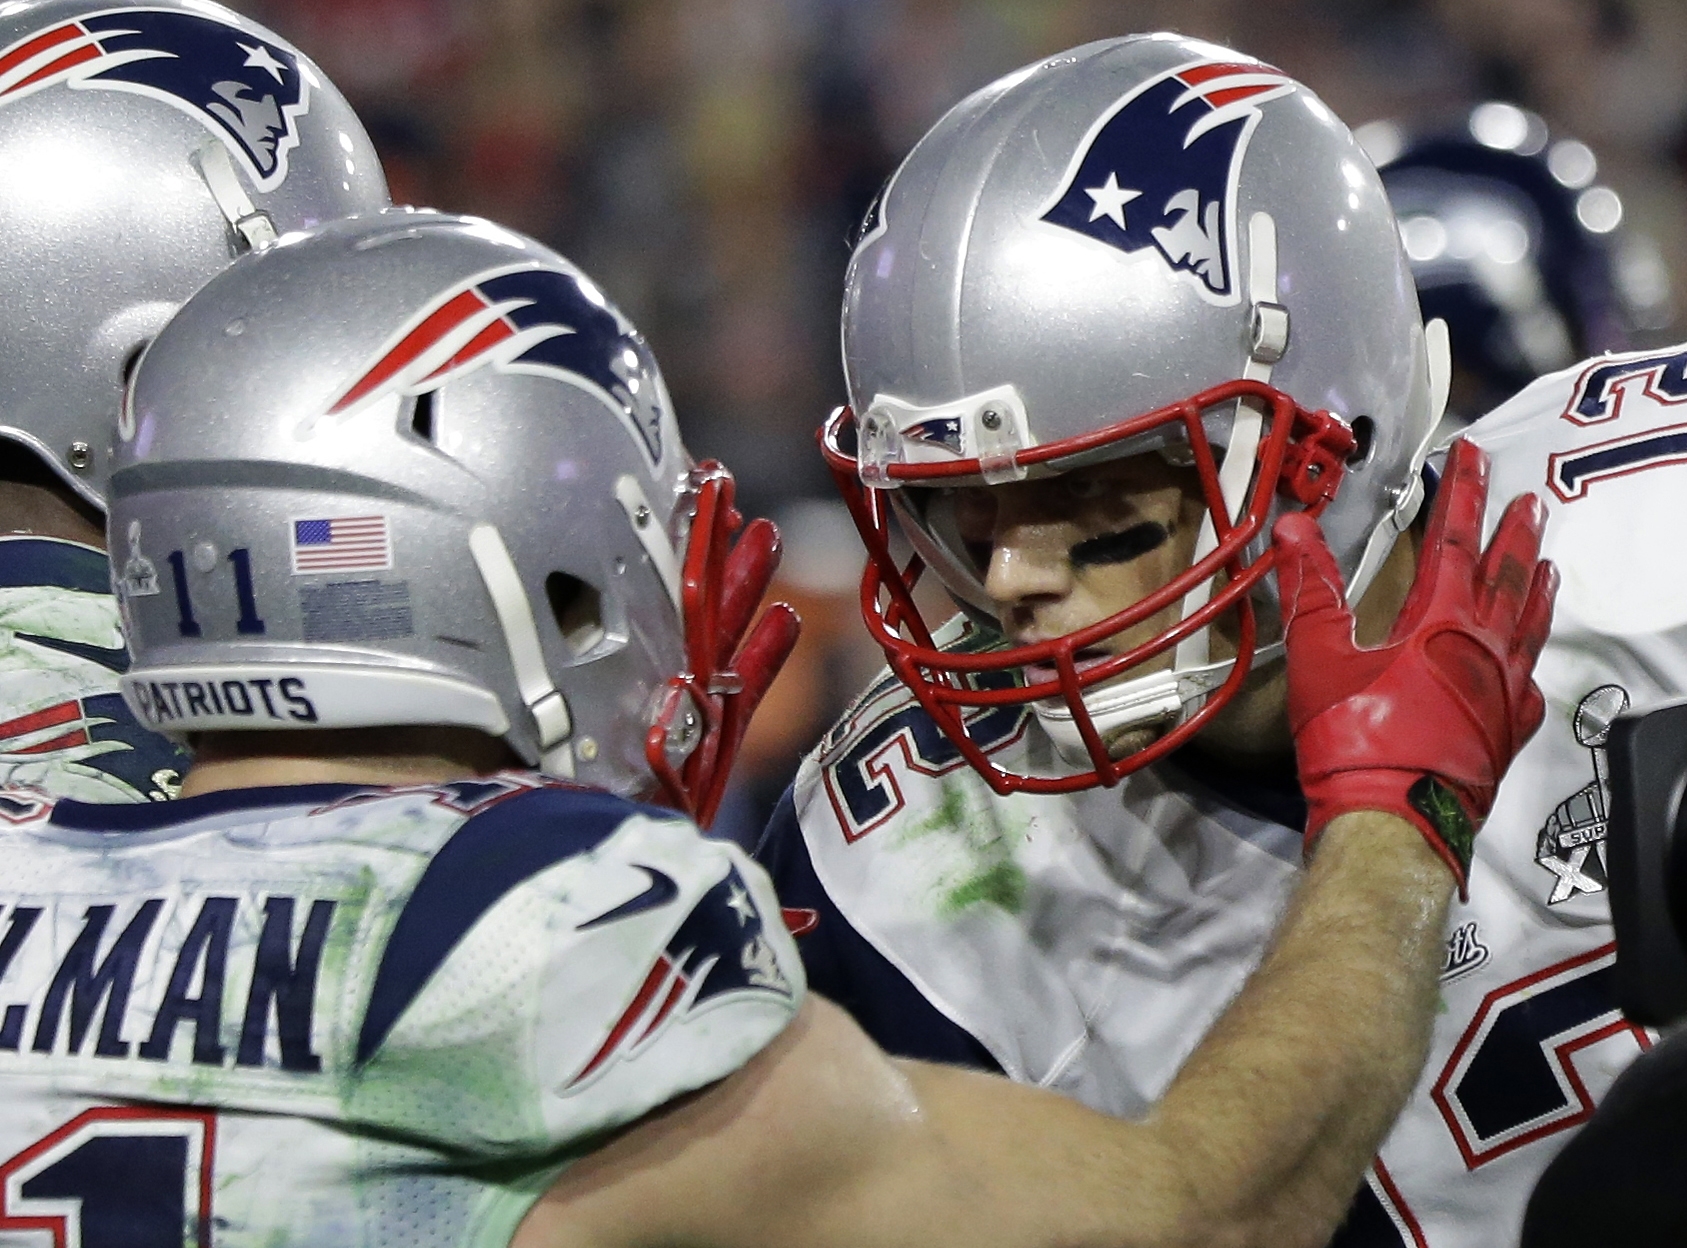 New England Patriots wide receiver Julian Edelman (11) celebrates with Tom Brady after catching a three-yard touchdown pass during the second half of NFL Super Bowl XLIX football game against the Seattle Seahawks Sunday, Feb. 1, 2015, in Glendale, Ariz. (AP Photo/David Goldman)